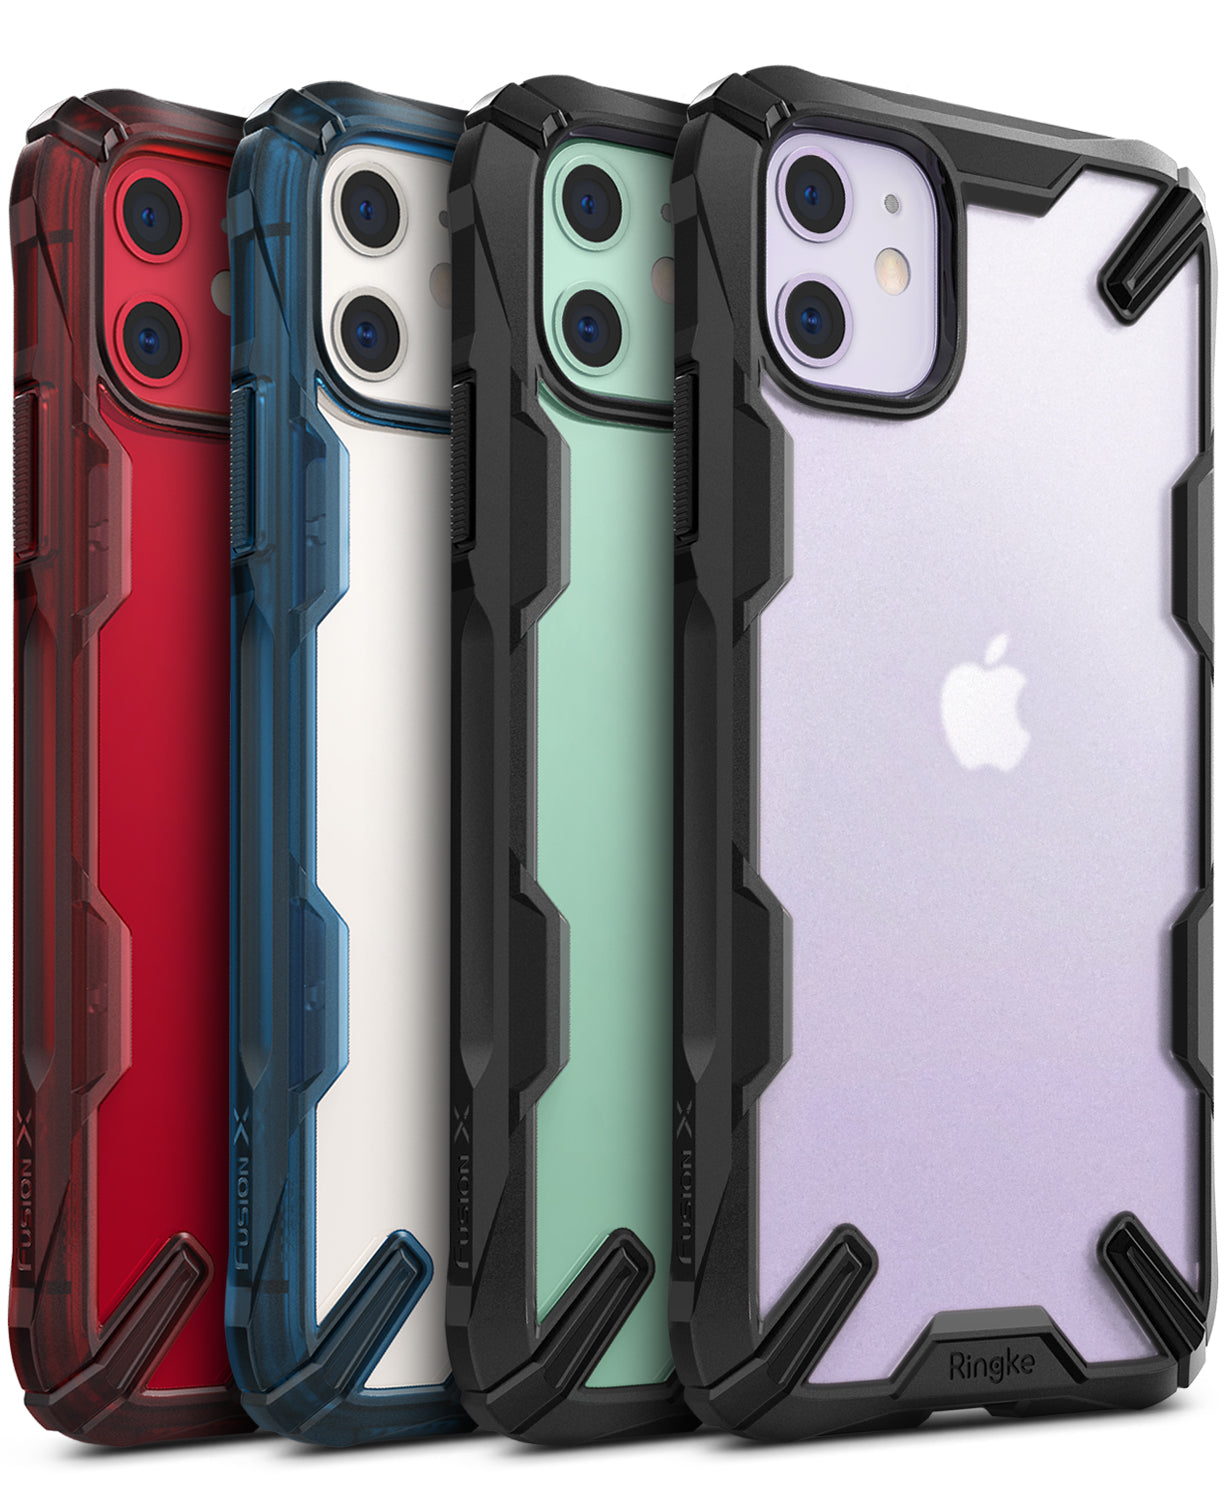 Ringke Fusion-X designed for iPhone 11